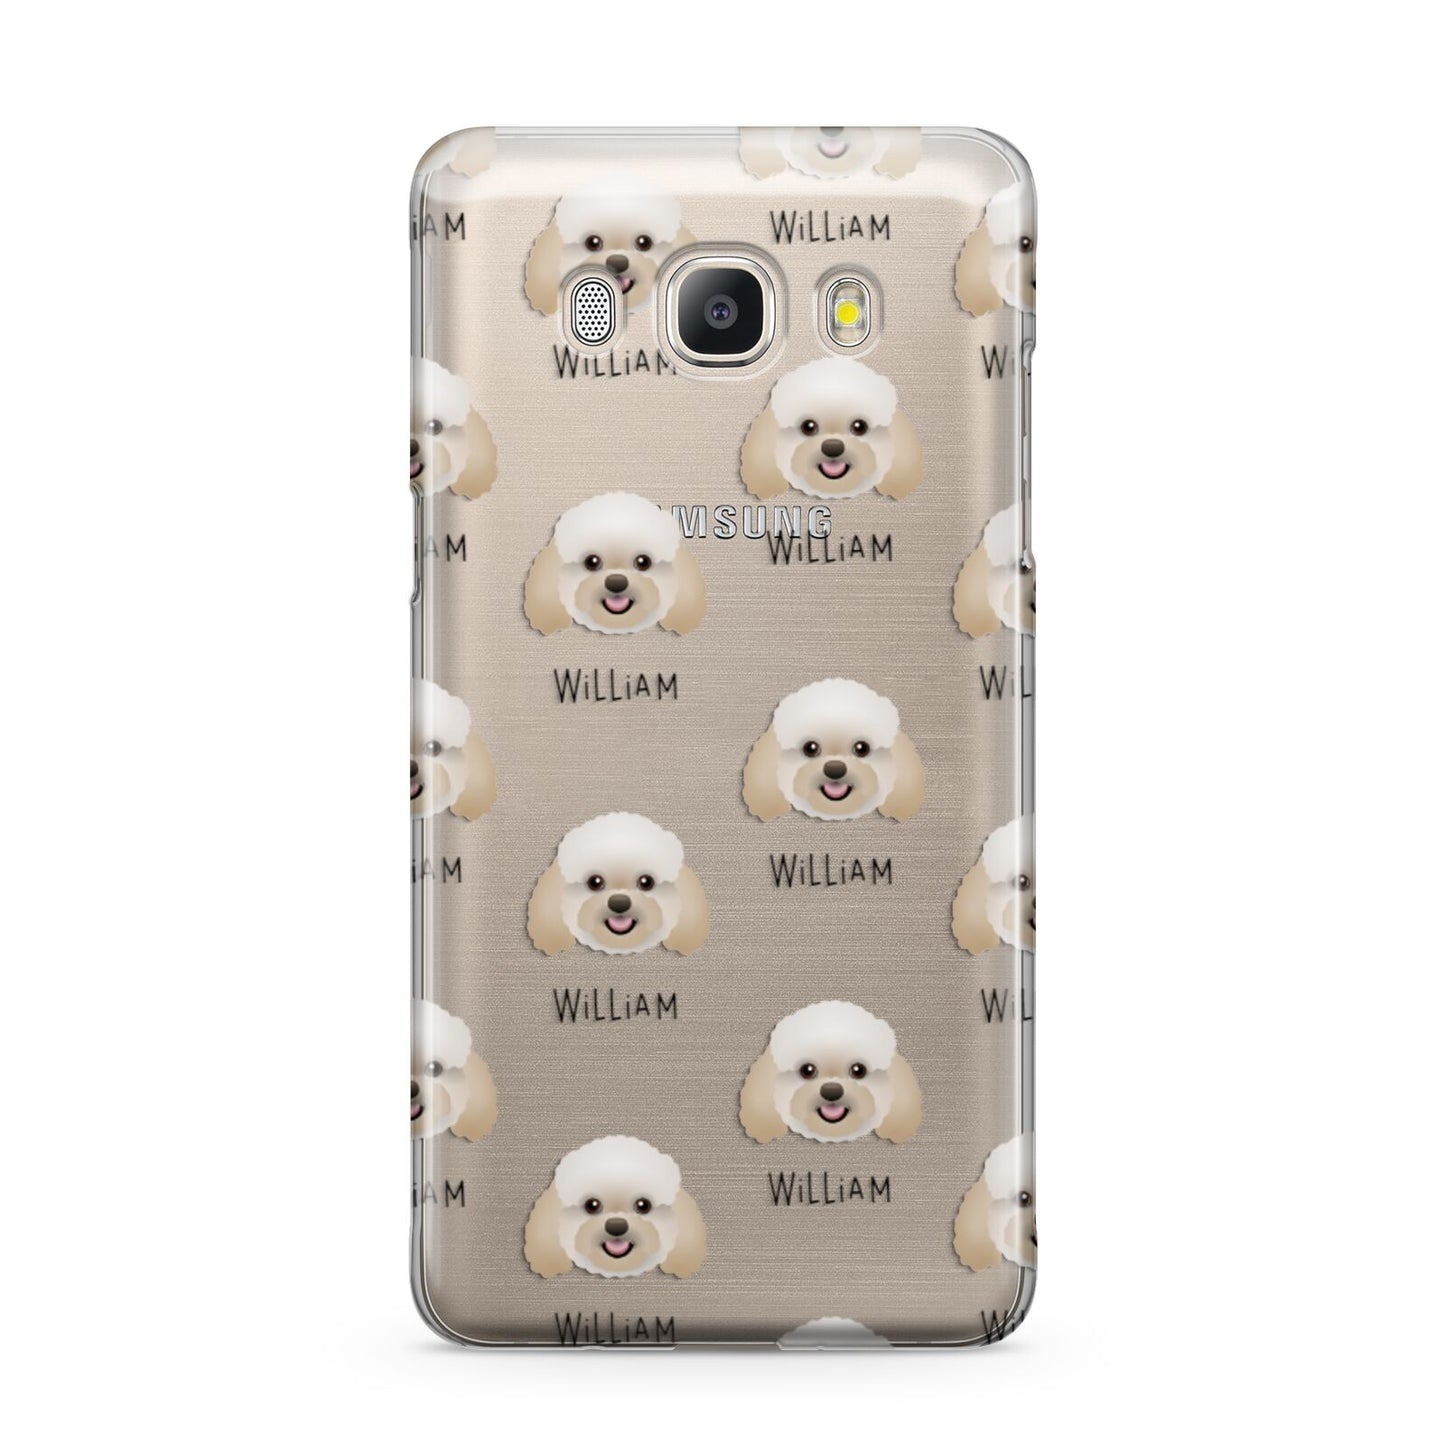 Bich poo Icon with Name Samsung Galaxy J5 2016 Case